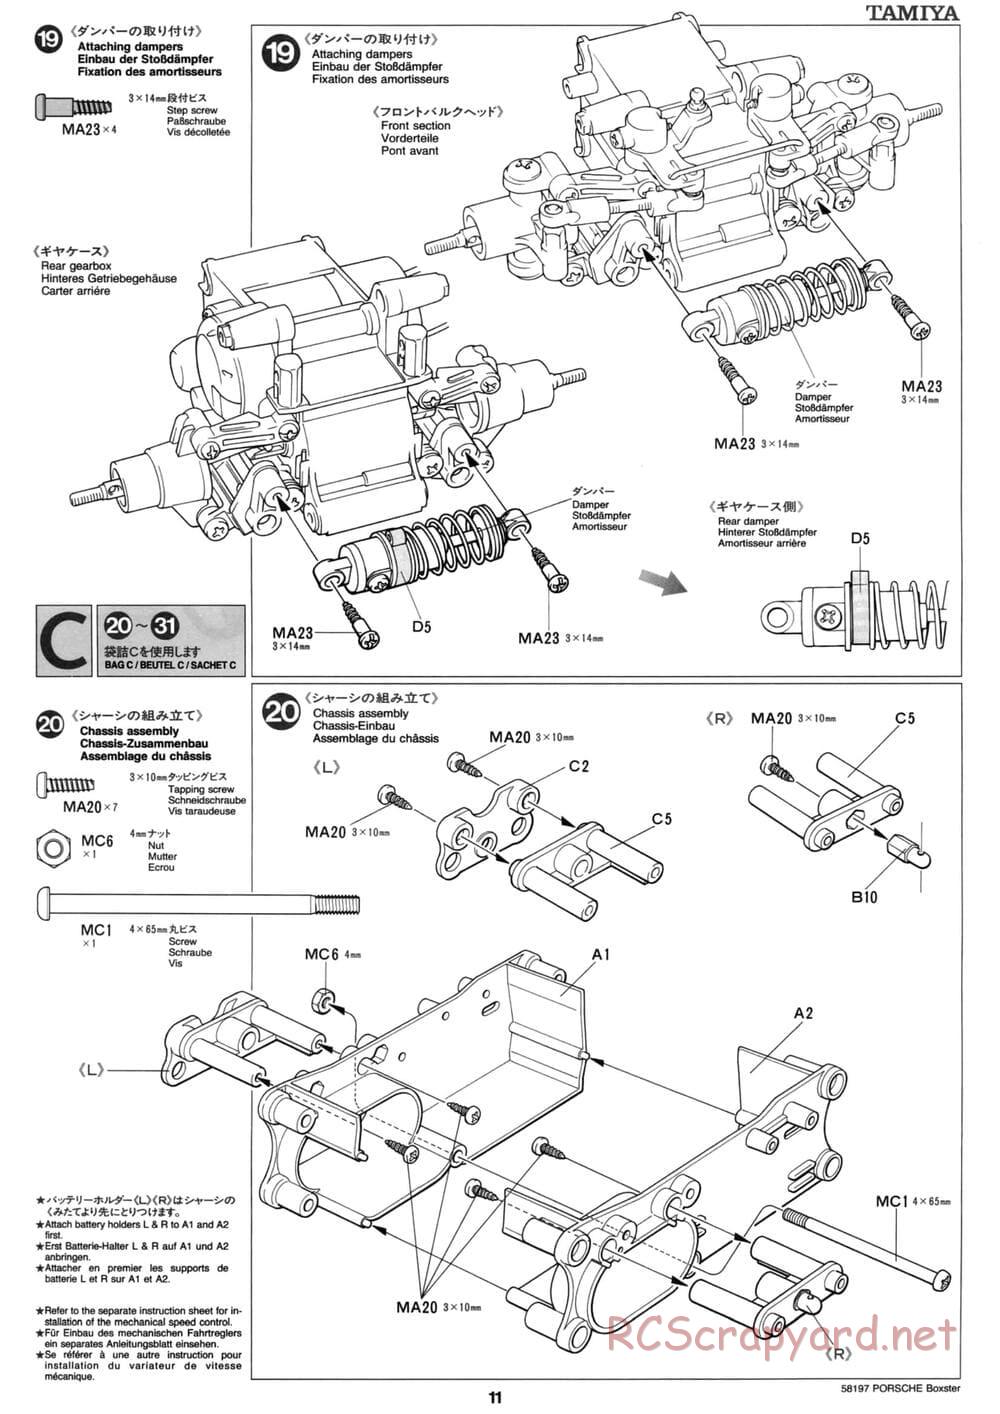 Tamiya - Porsche Boxster - M02L Chassis - Manual - Page 11